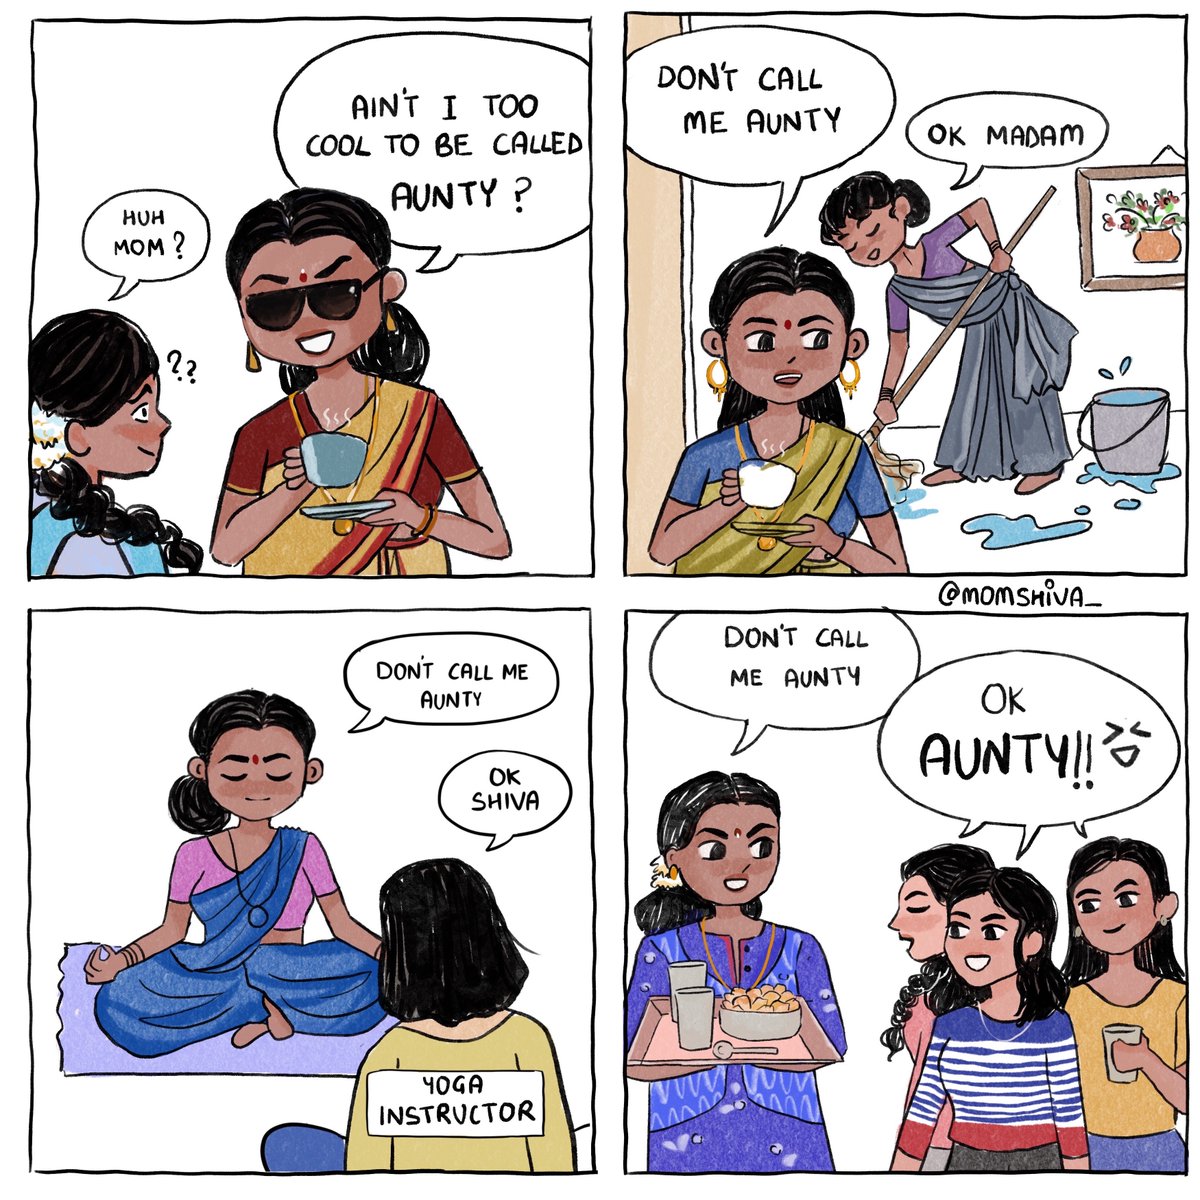 I had the privilege of creating a heartwarming comic for a client as a tribute to her late mother's 57th birthday. She wanted to preserve all the happy memories she shared with her mother and capture her unique traits & humor in the #comic. #Indiancomic #Indianart #mom #Indianart